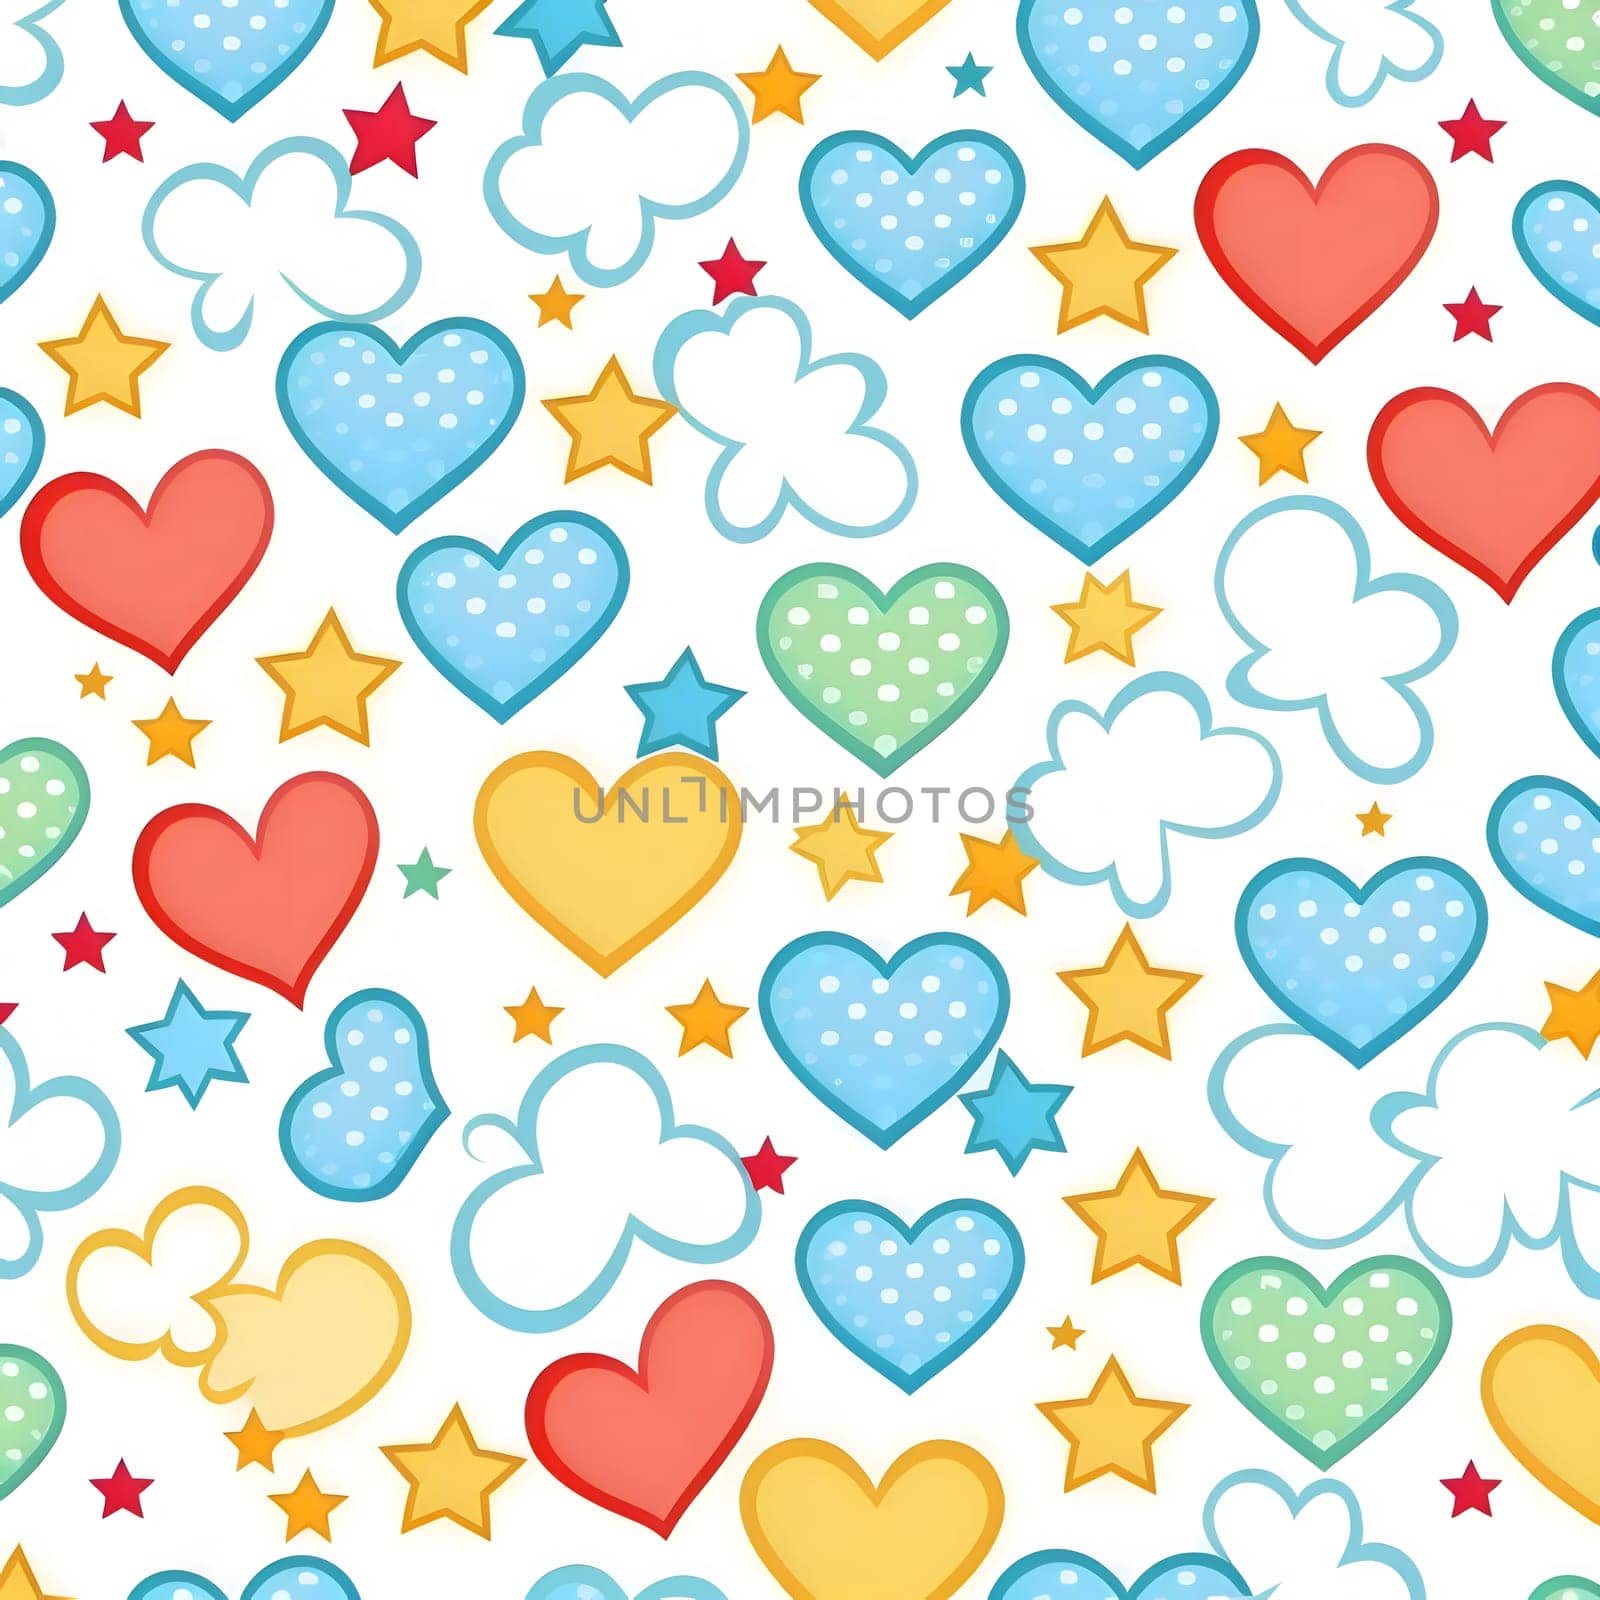 Patterns and banners backgrounds: Seamless pattern with hearts, stars and clouds. Vector illustration.